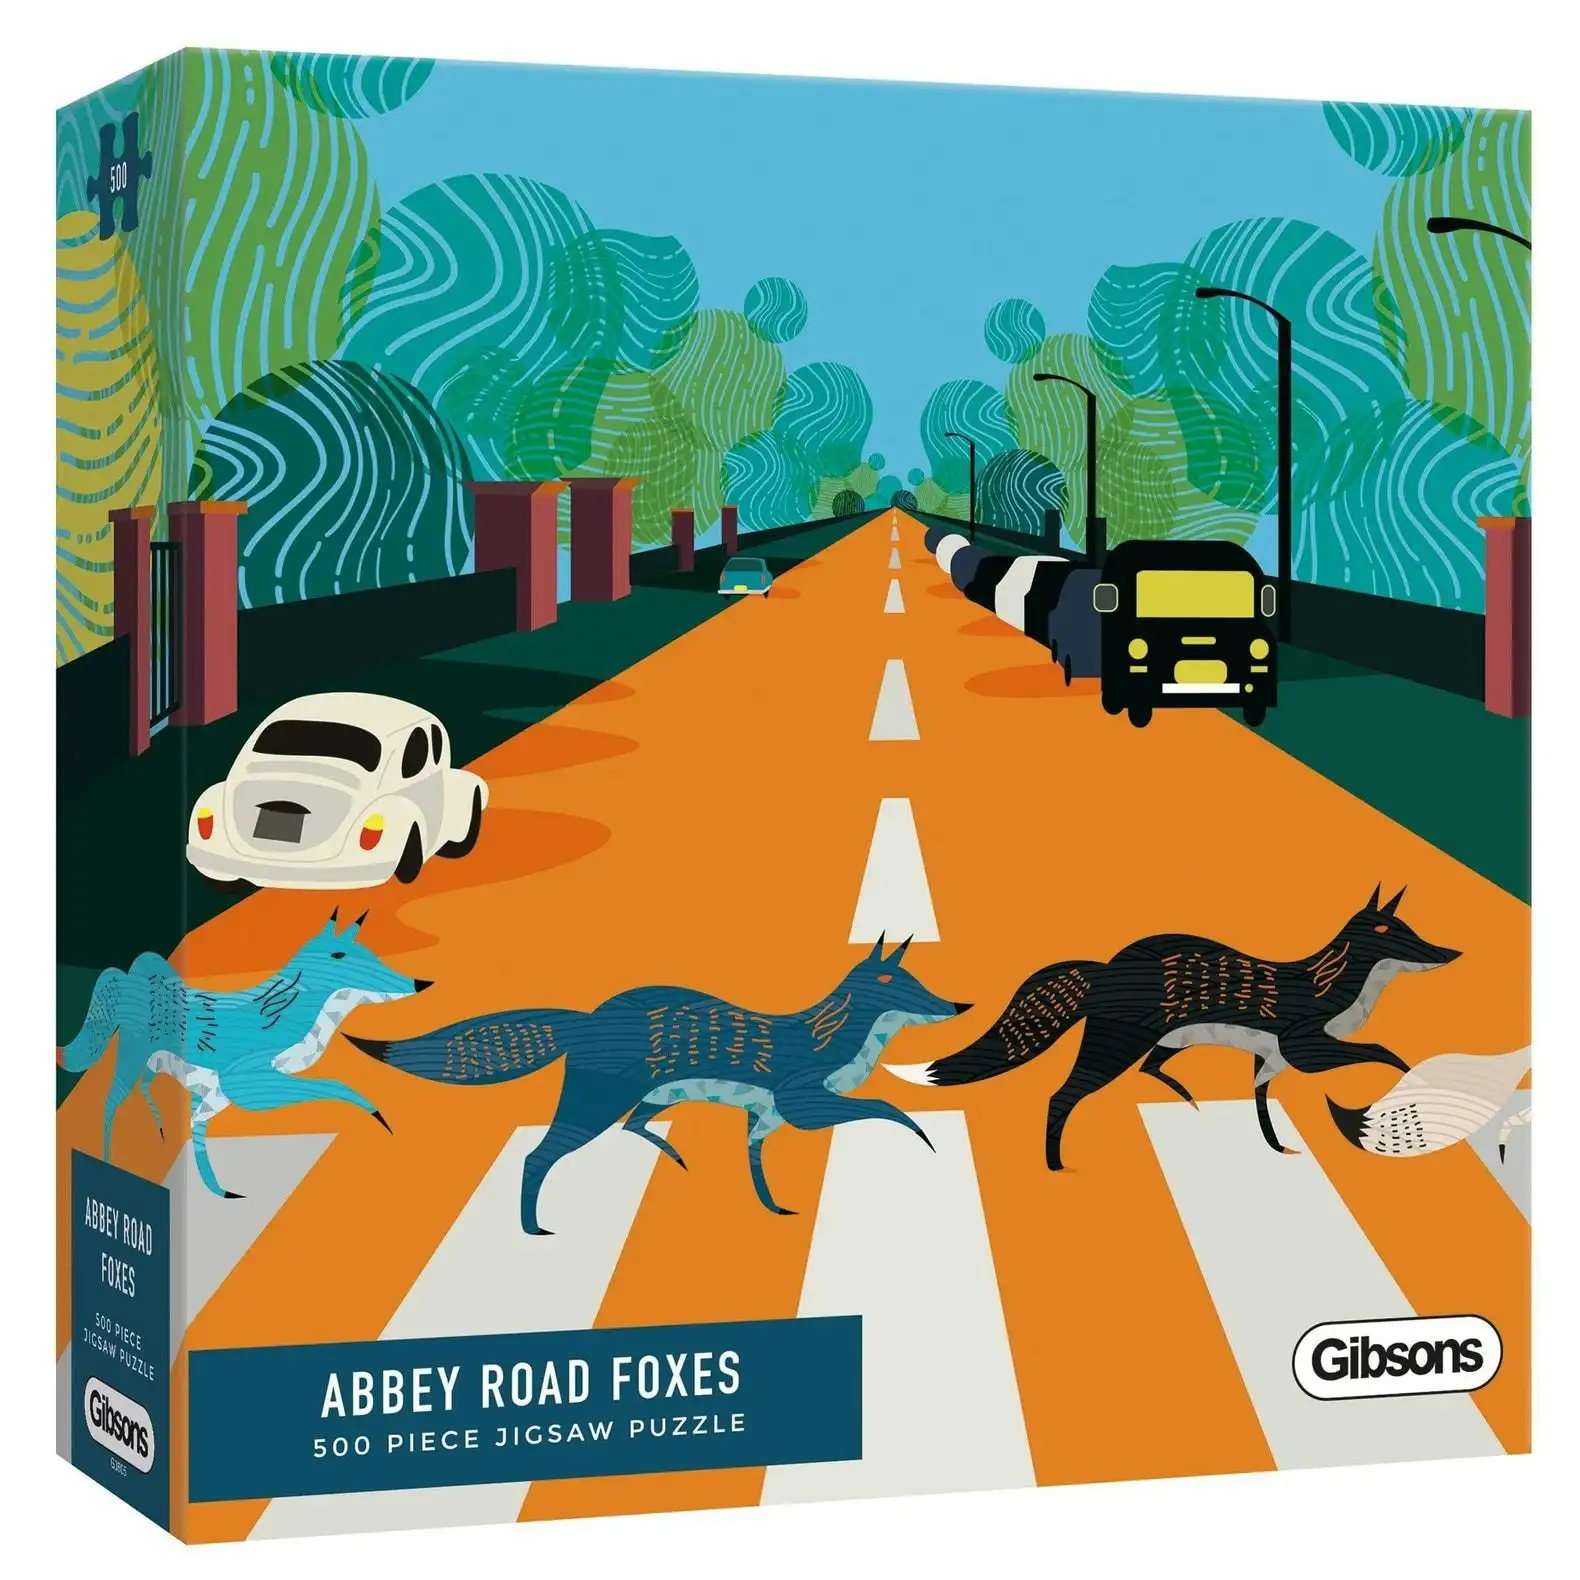 Gibsons - Abbey Road Foxes - Jigsaw Puzzle 500 Pieces